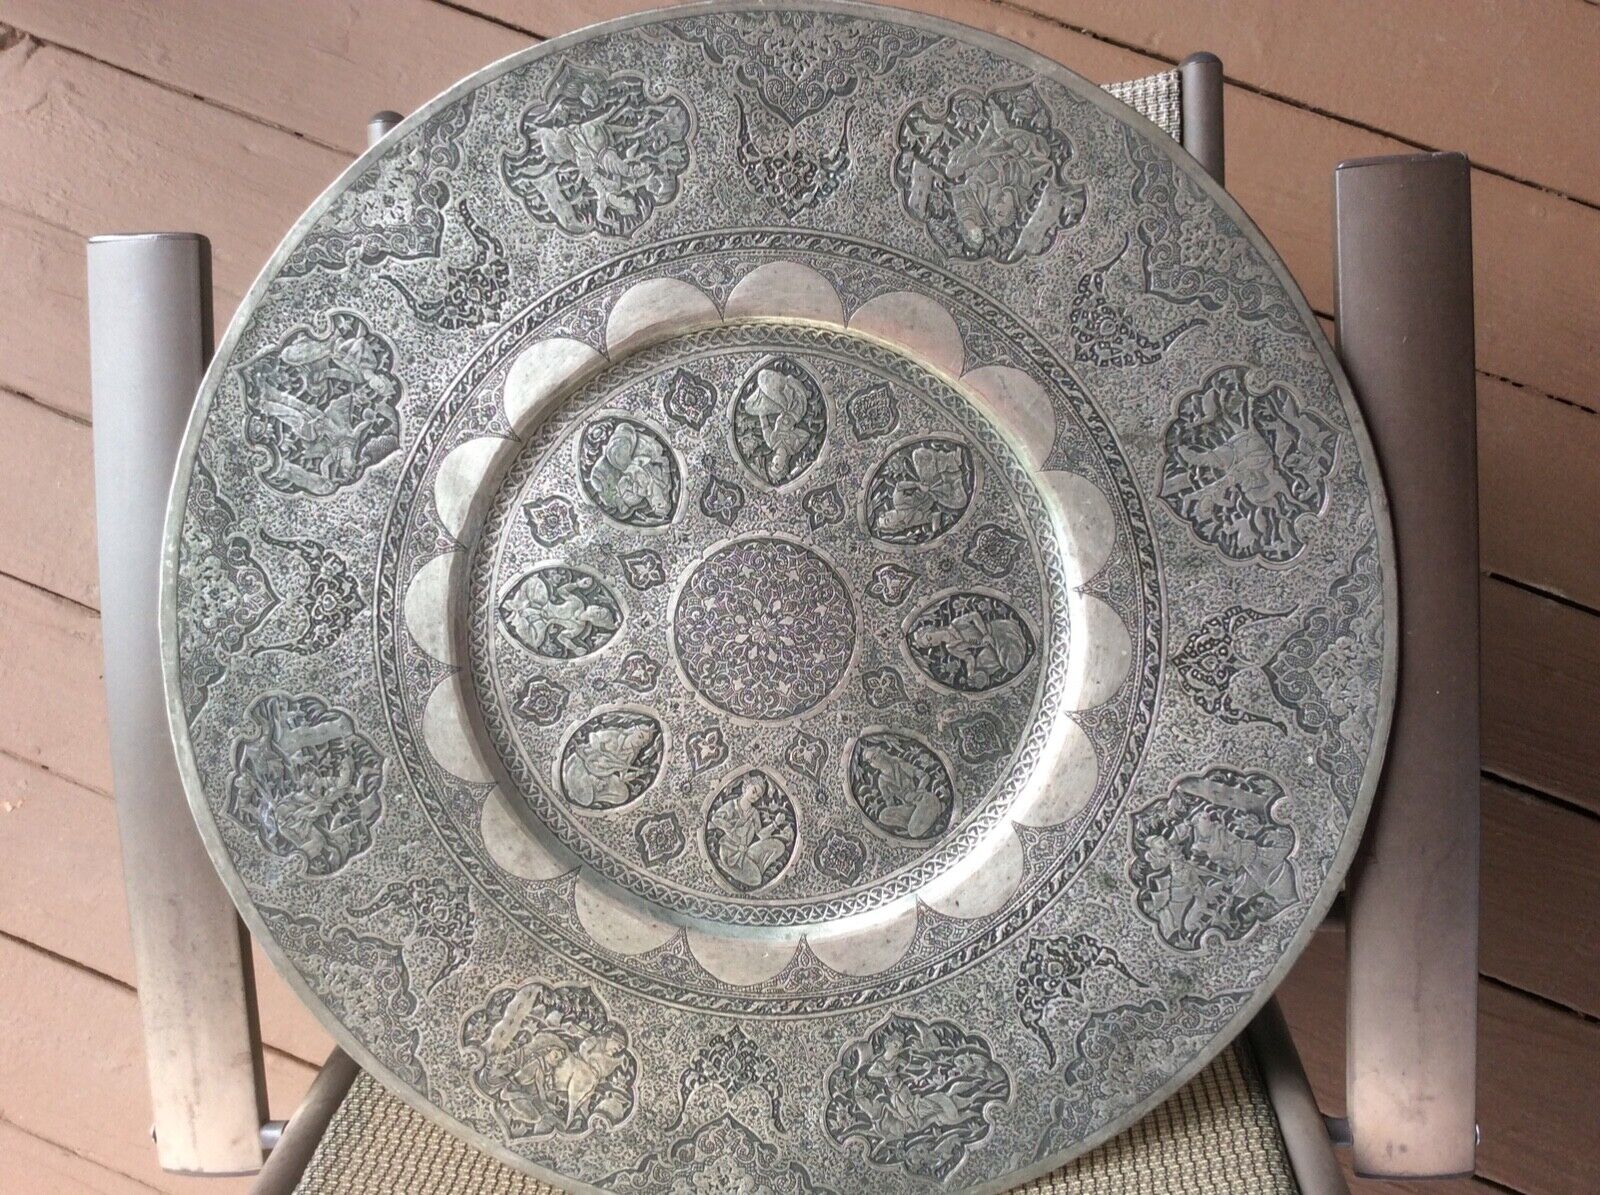 ANTIQUE METALWARE DISH LG. SILVER TONE HIGHLY DECORATIVE. 18th. / 19 Th CENTURY?